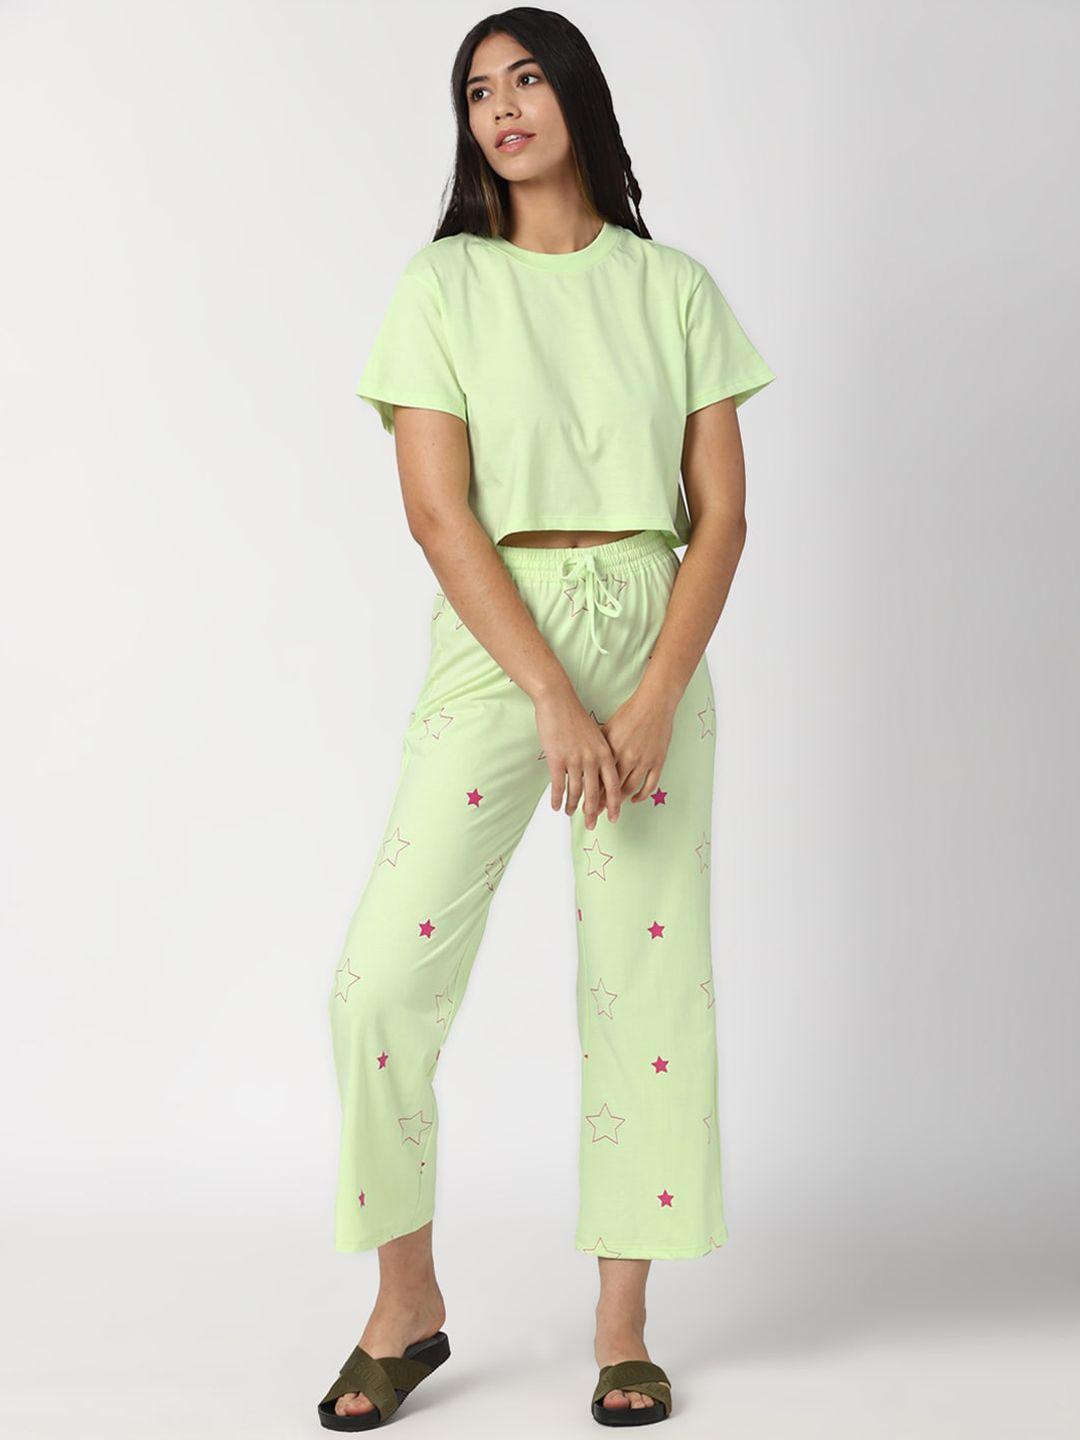 forever-21-women-green-printed-cotton-night-suit